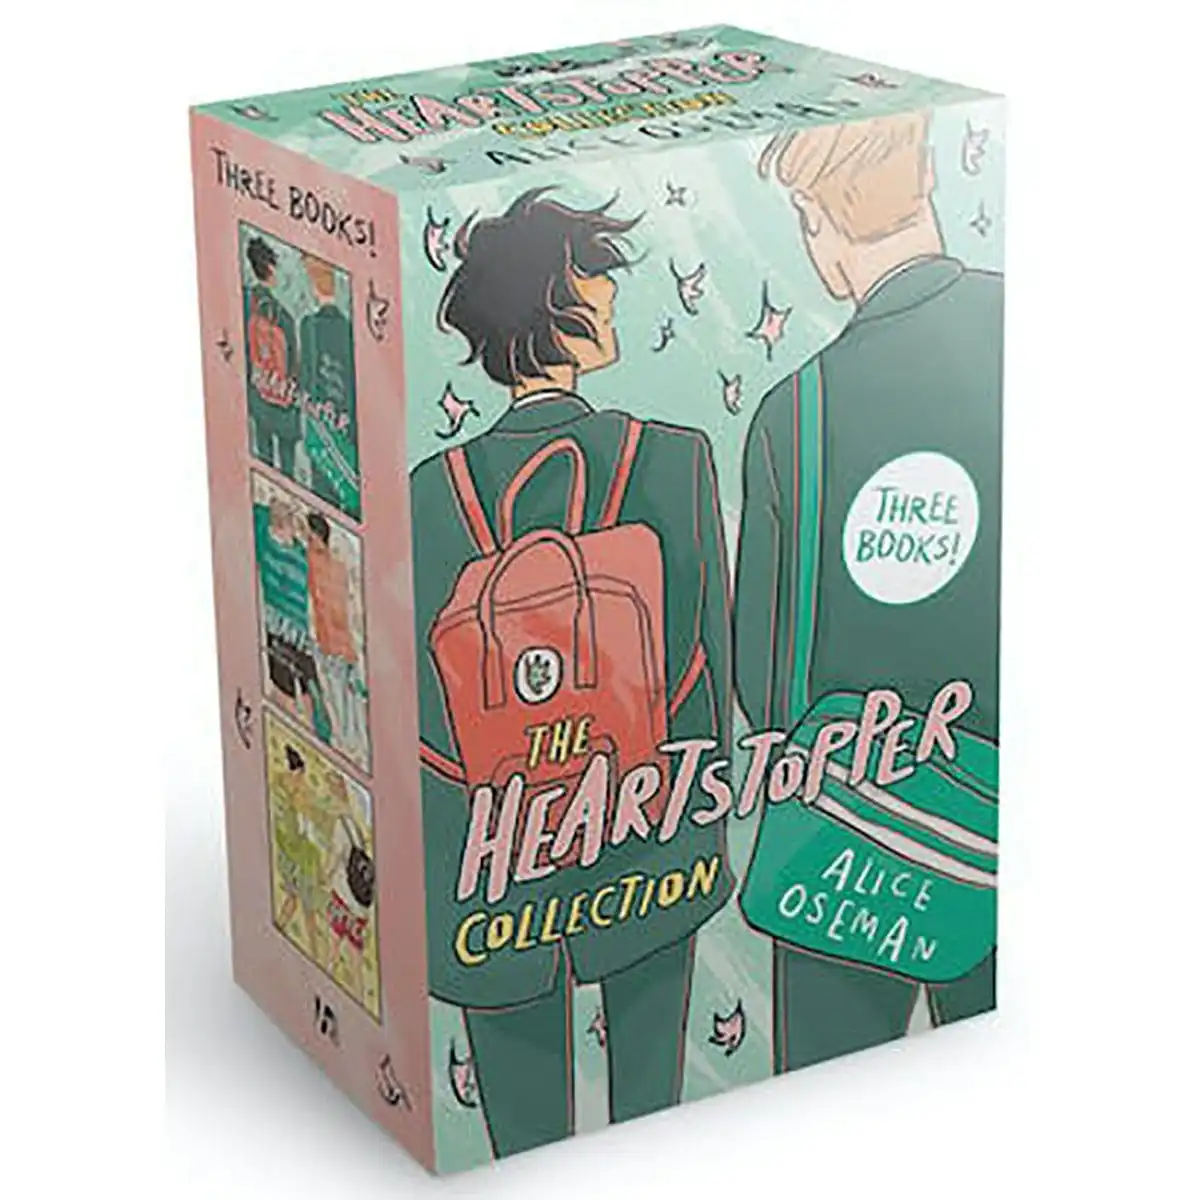 Hachette The Heartstopper Collection